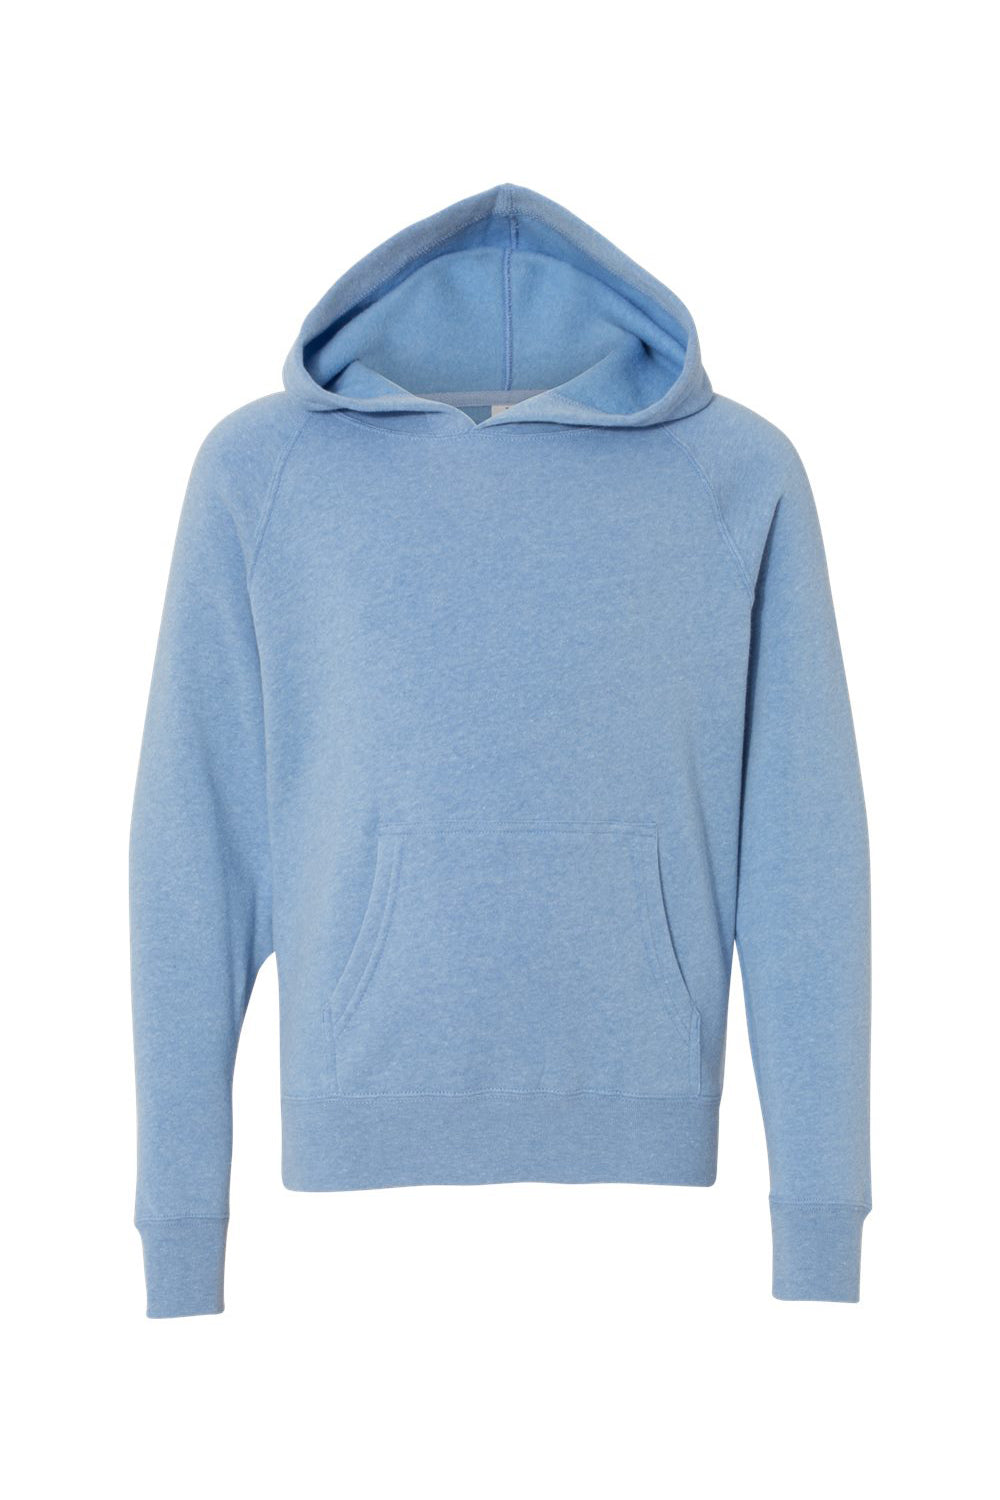 Independent Trading Co. PRM15YSB Youth Special Blend Raglan Hooded Sweatshirt Hoodie Pacific Blue Flat Front